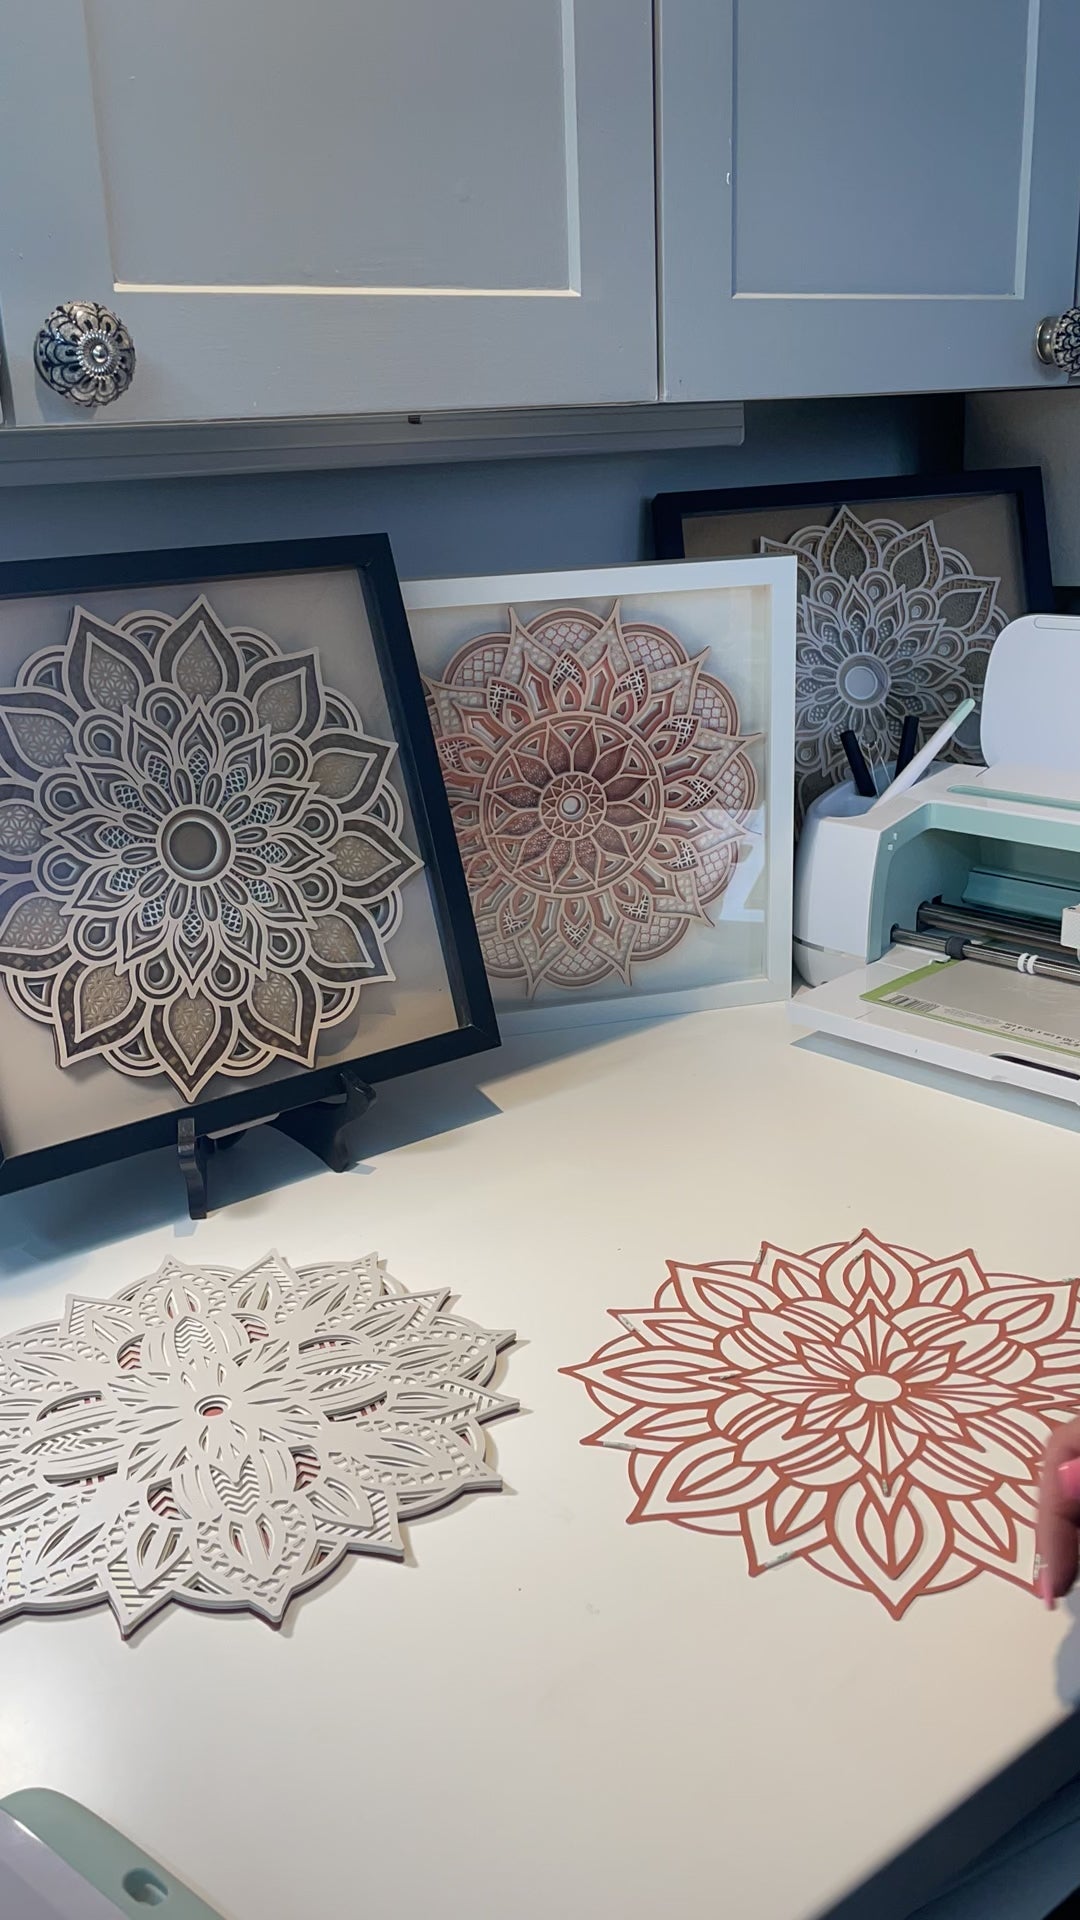 Watch as I assemble a 3d layered Mandala.  I'm using double sided 3m sticky tape and the fine point needle tool from Cricut. In the background are framed Mandalas in Shadow boxes.  Purchase your favorite 3d Layered Mandala Design at Home Stitchery Decor and follow along with the step-by-step tutorial.  3d Layered Mandala SVG instant download designs by Home Stitchery Decor